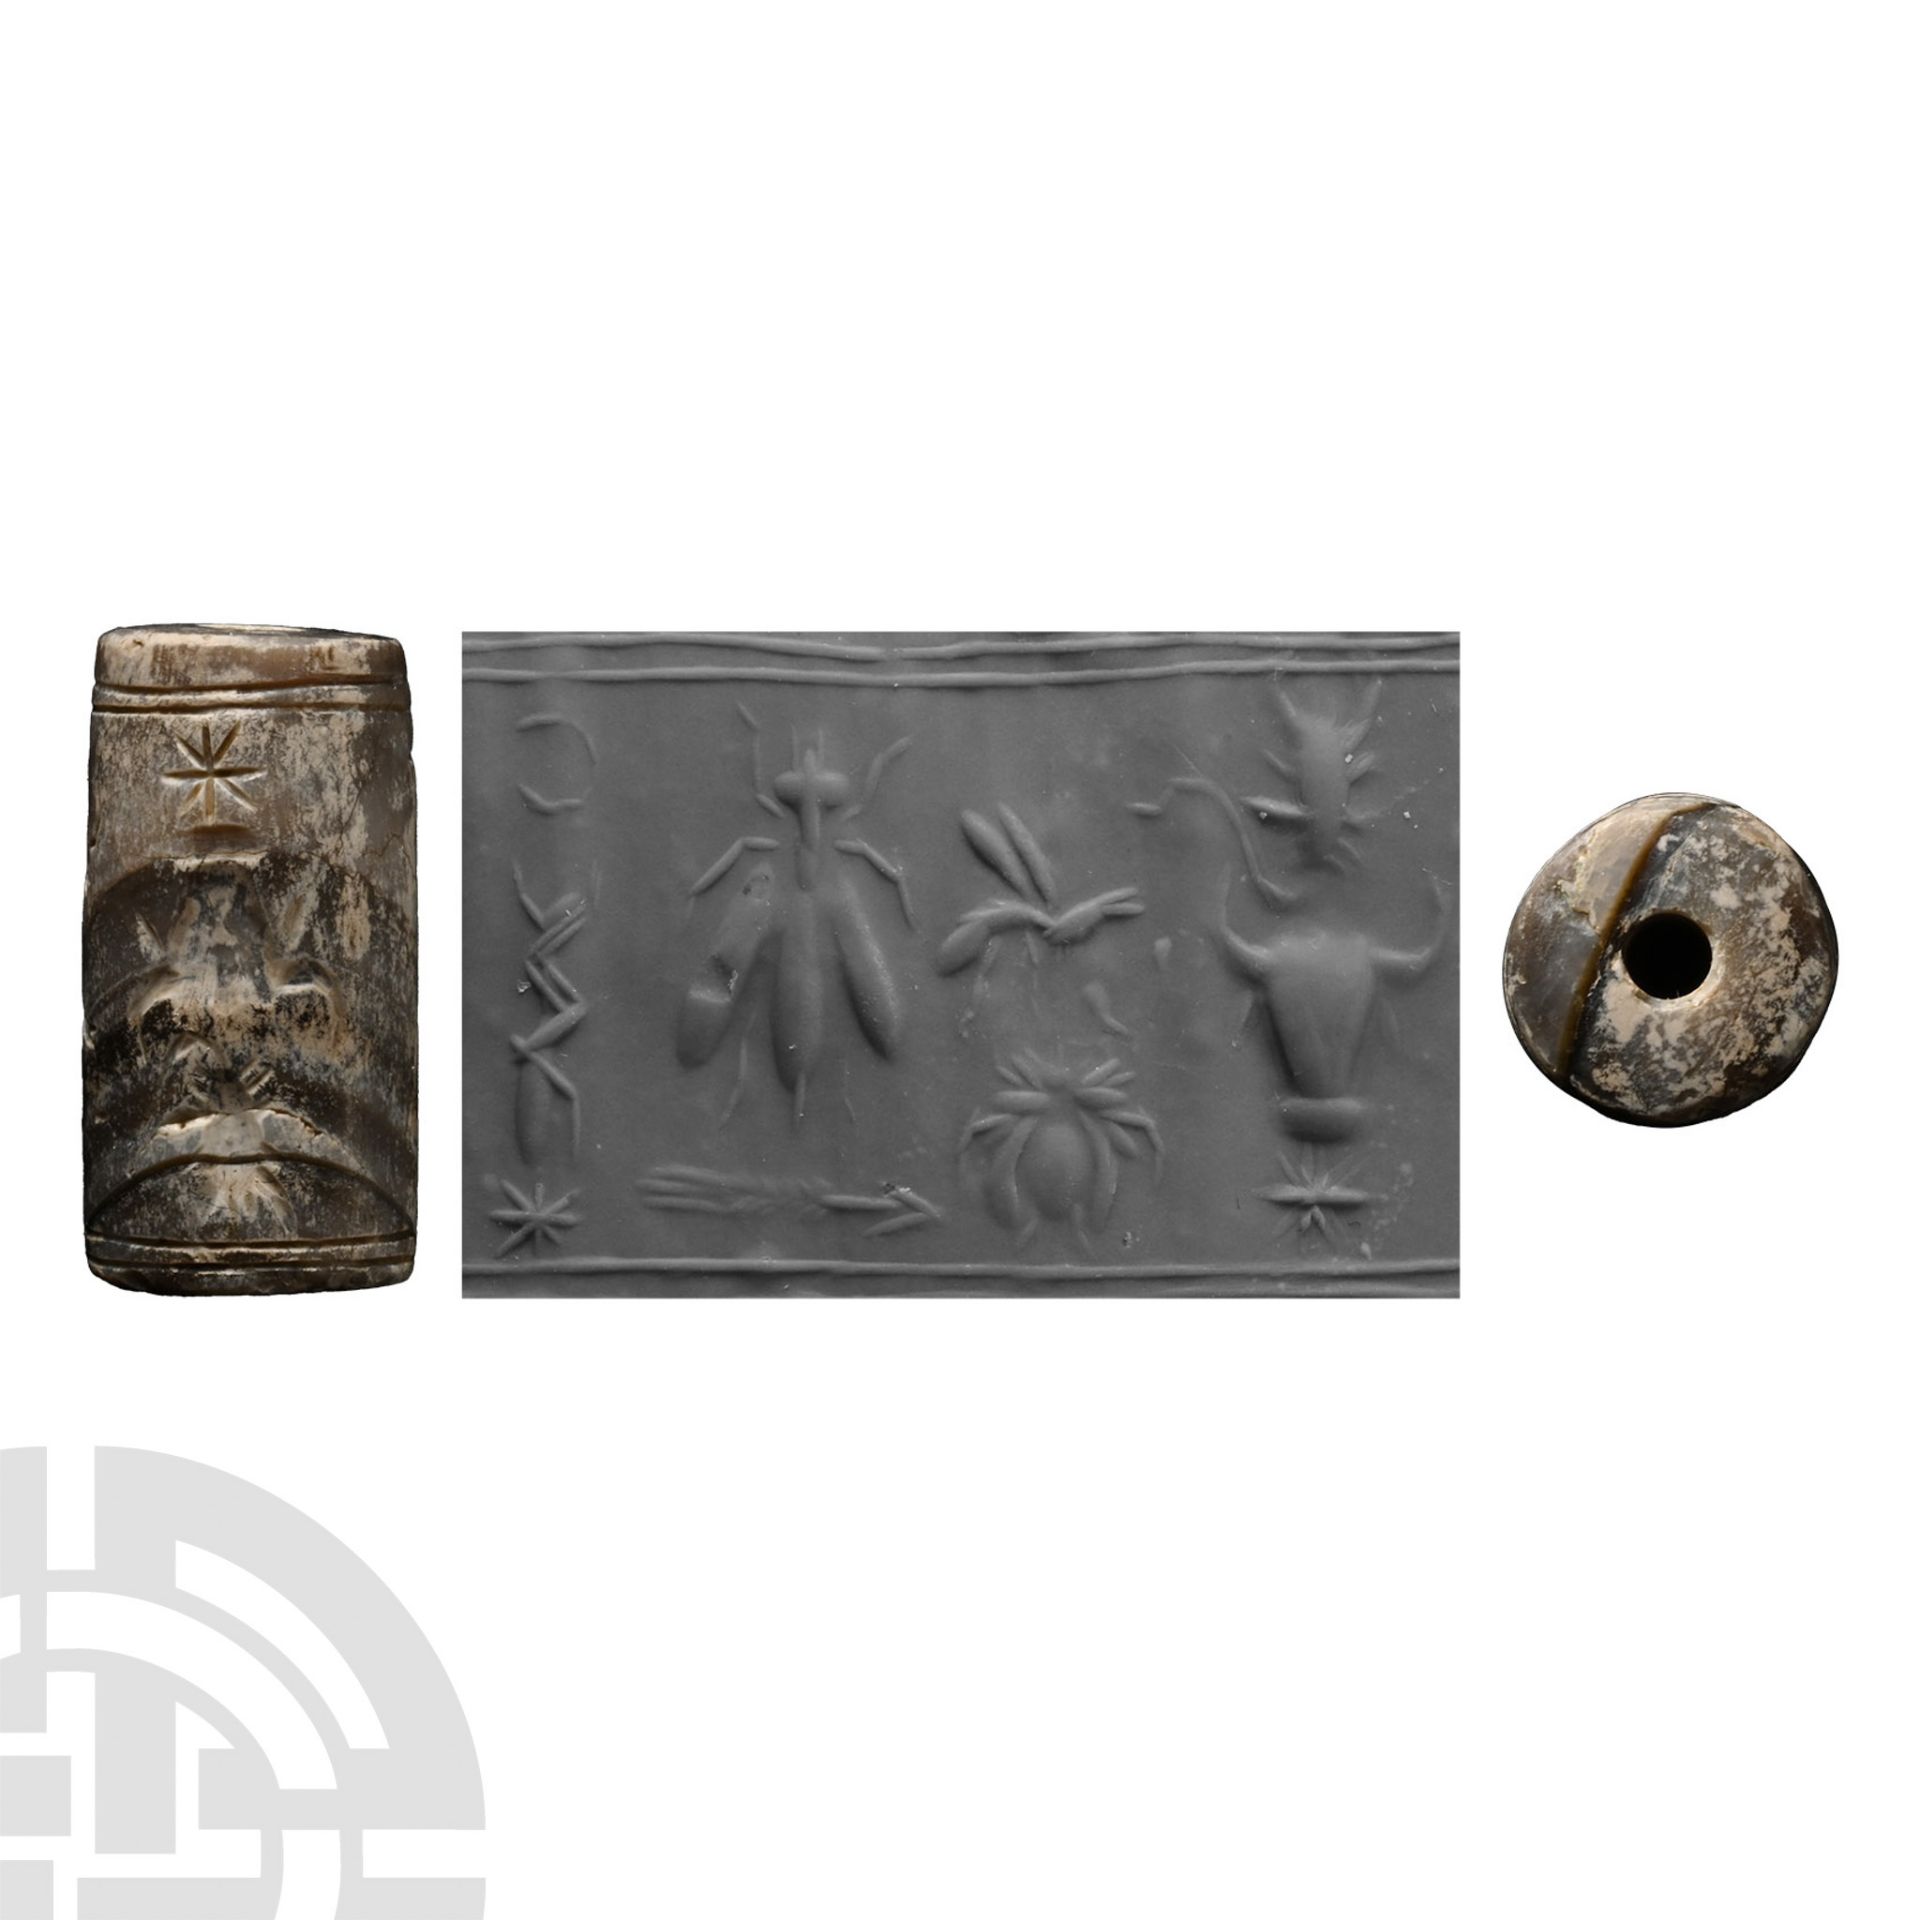 Mesopotamian Agate Cylinder Seal with Bull's Head